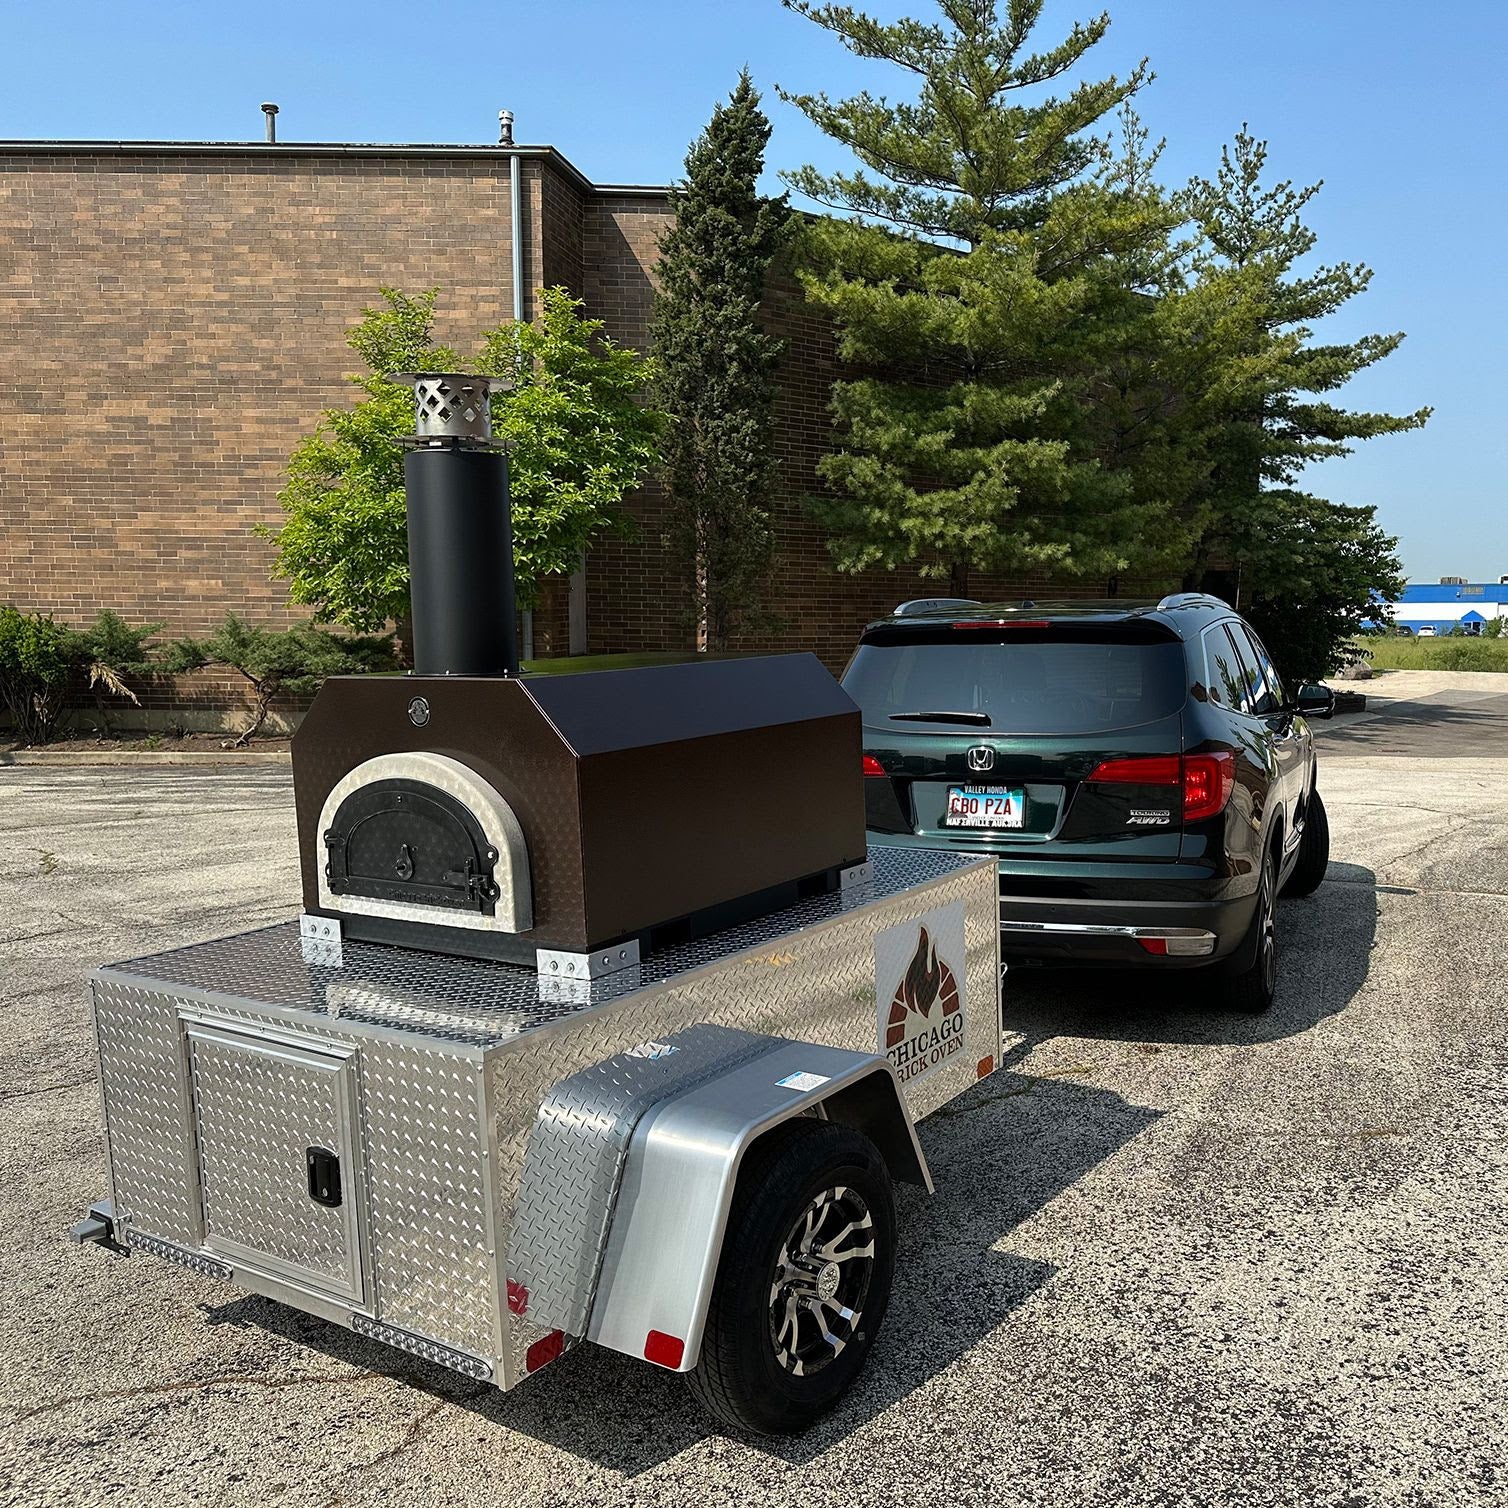 Chicago Brick Oven 750 Tailgater | Wood Fired Pizza Oven